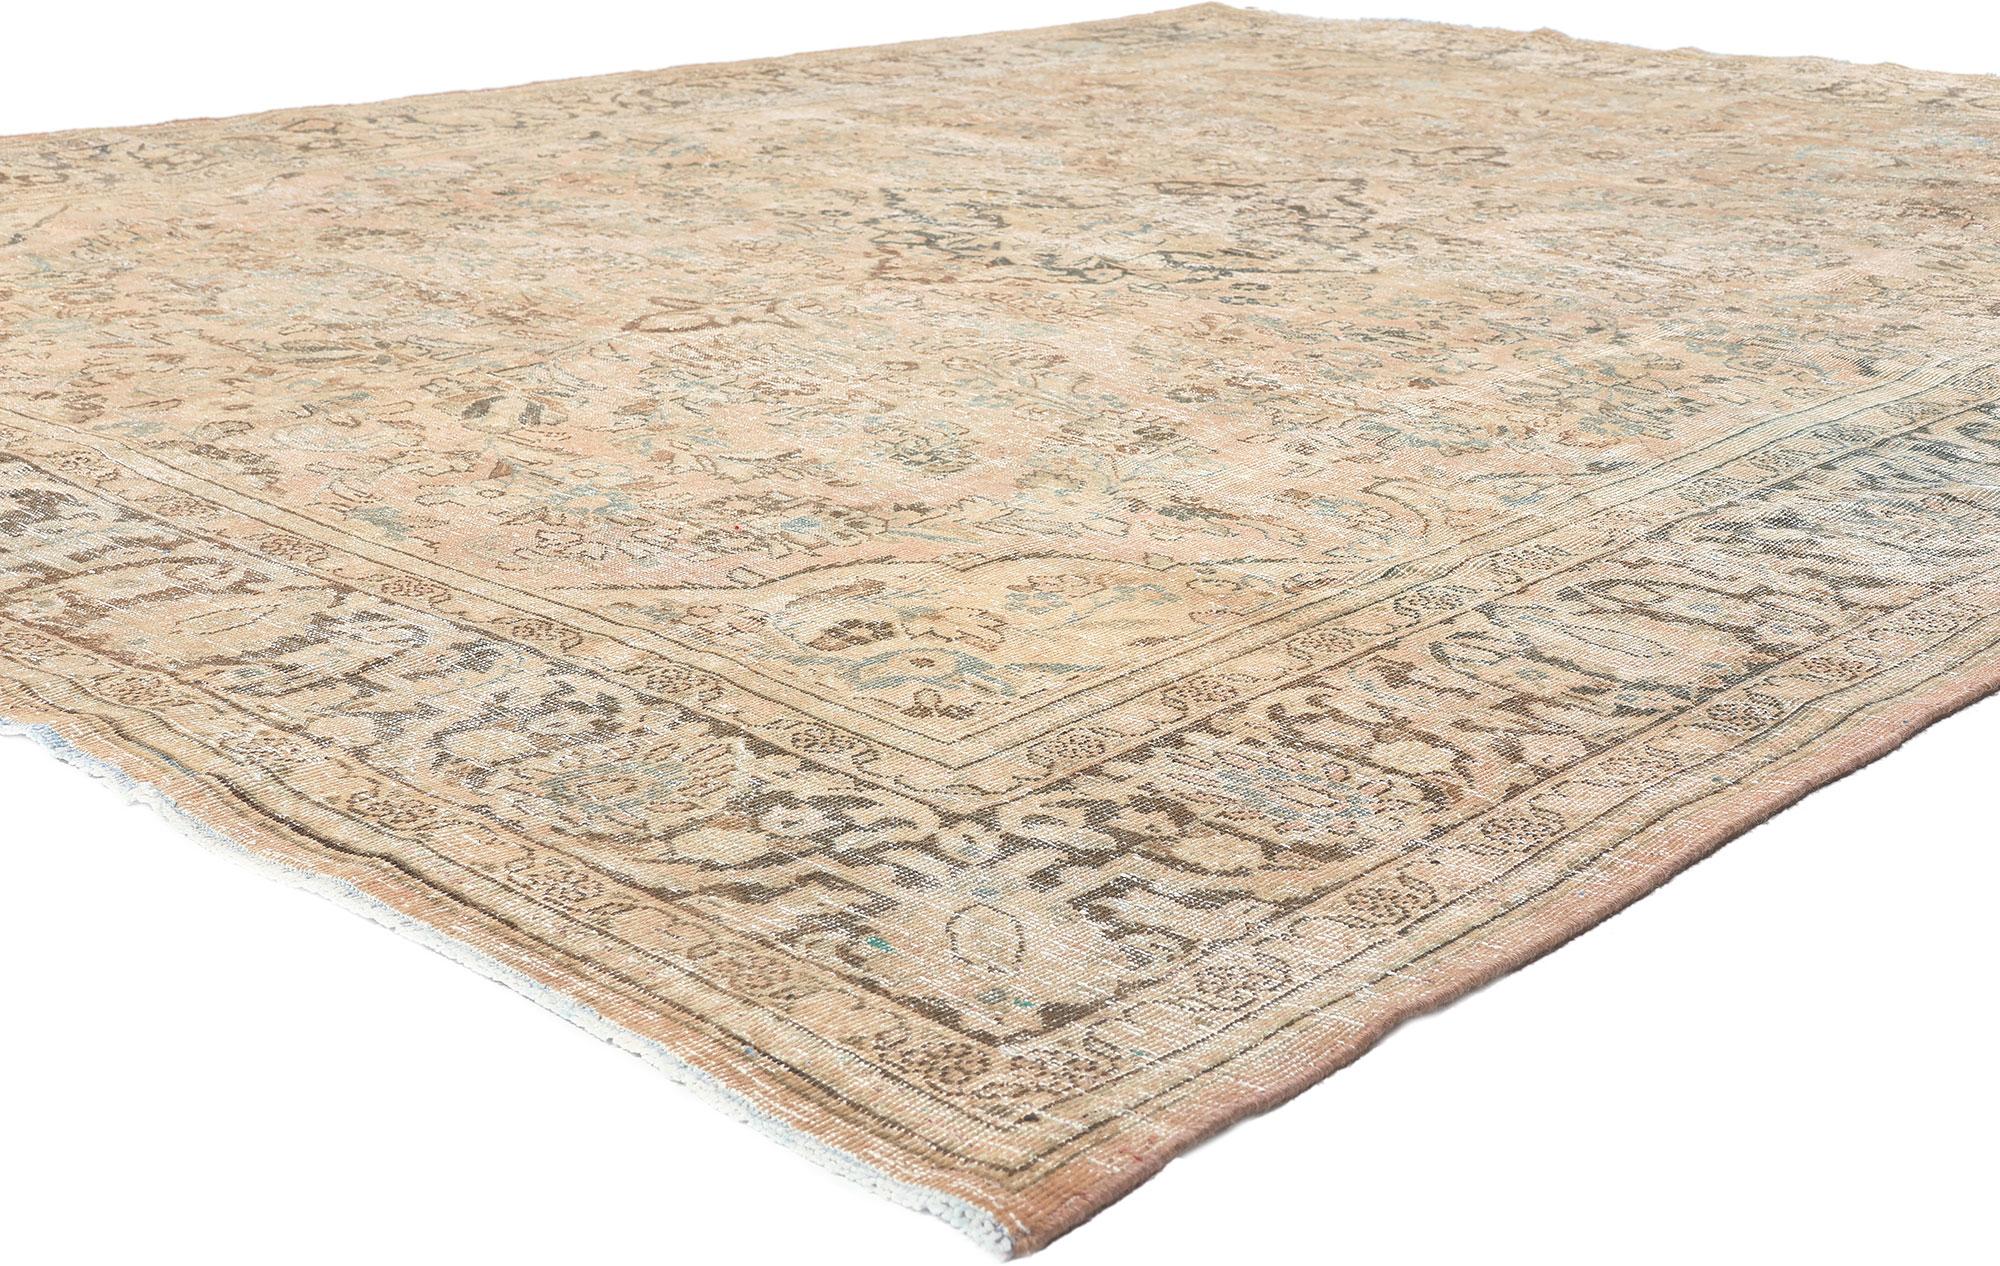 61268 Distressed Antique Persian Mahal Rug, 08'10 x 11'07.
Laid-back luxury meets quiet sophistication in this hand knotted wool distressed antique-worn Persian Mahal rug.​

Rendered in variegated shades of tan, brown, sage, ecru, taupe,